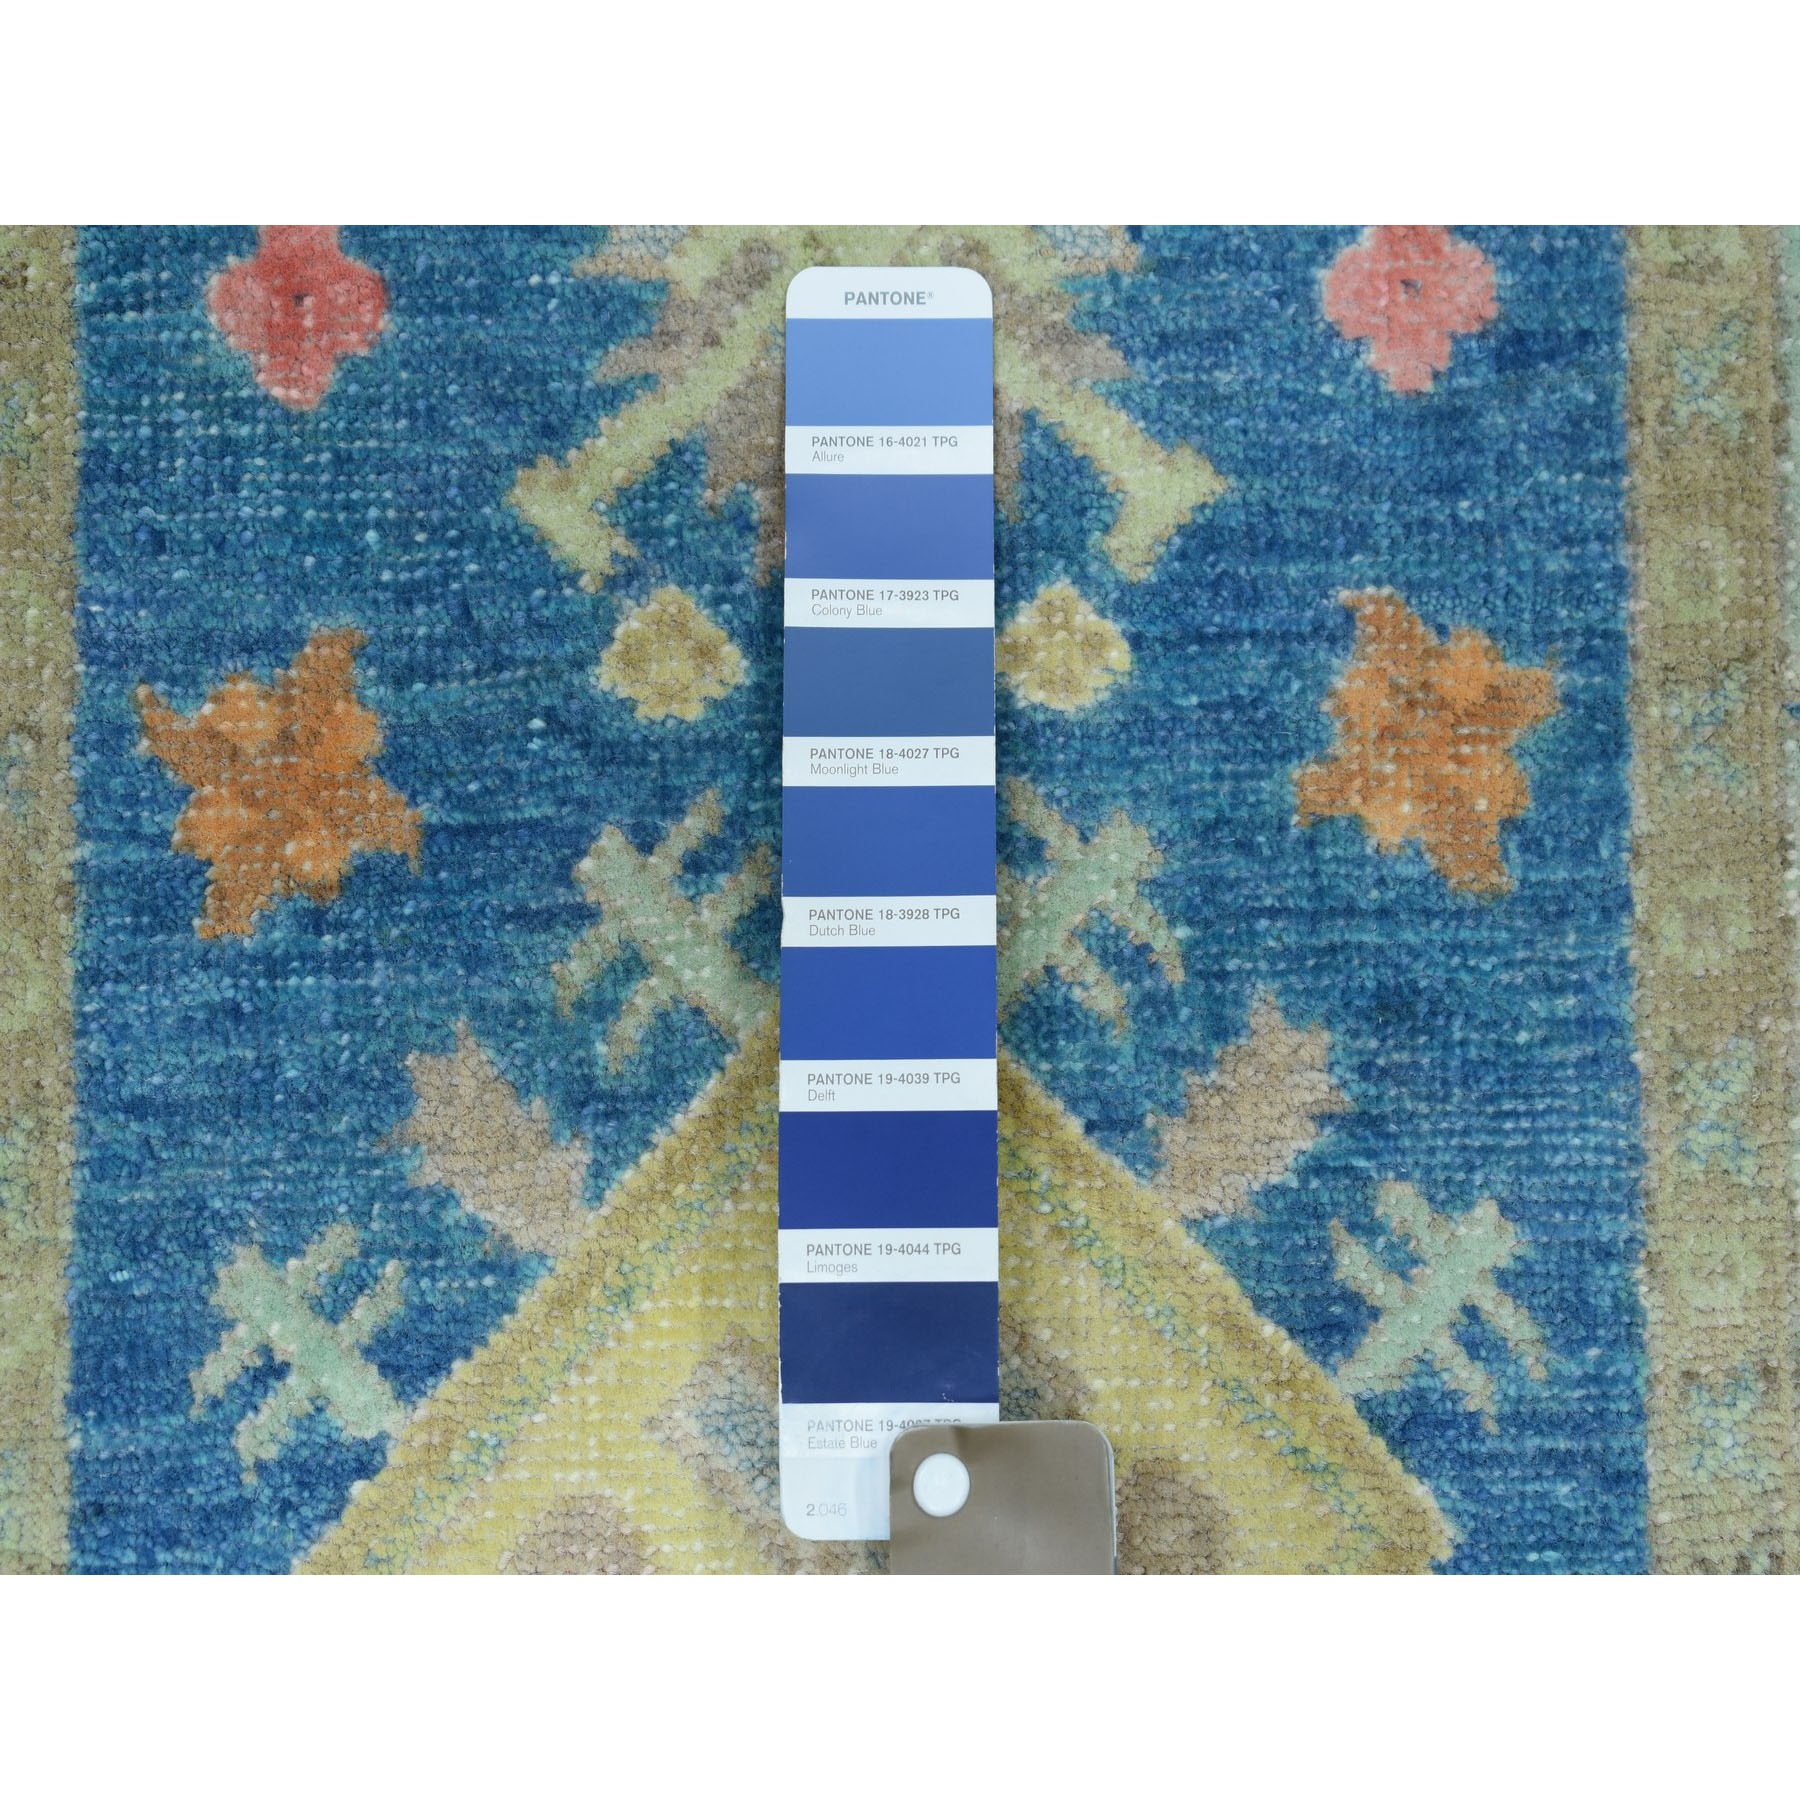 2-x2-9  Colorful Blue Fusion Kazak Pure Wool Hand Knotted Oriental Rug 